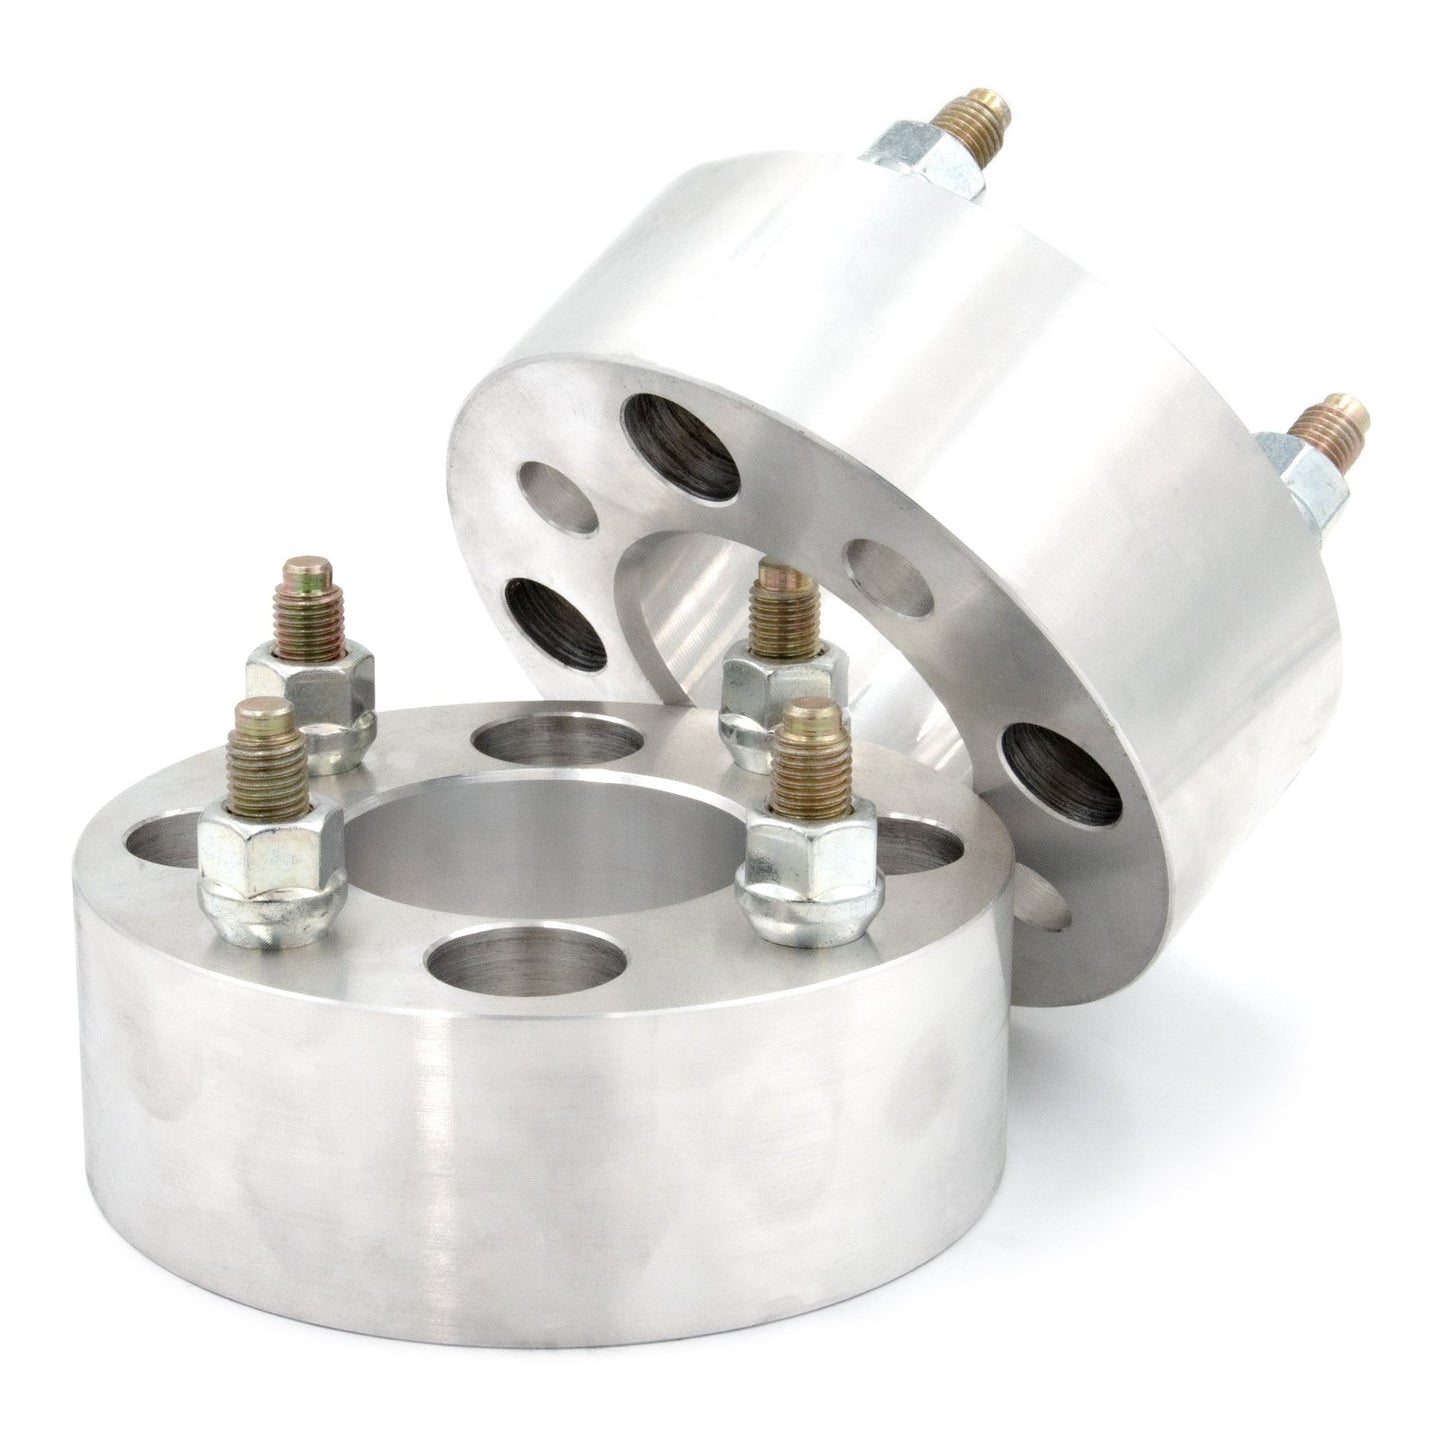 4x140 to 4x100 Wheel Spacer/Adapter - Thickness: 3/4"- 4"